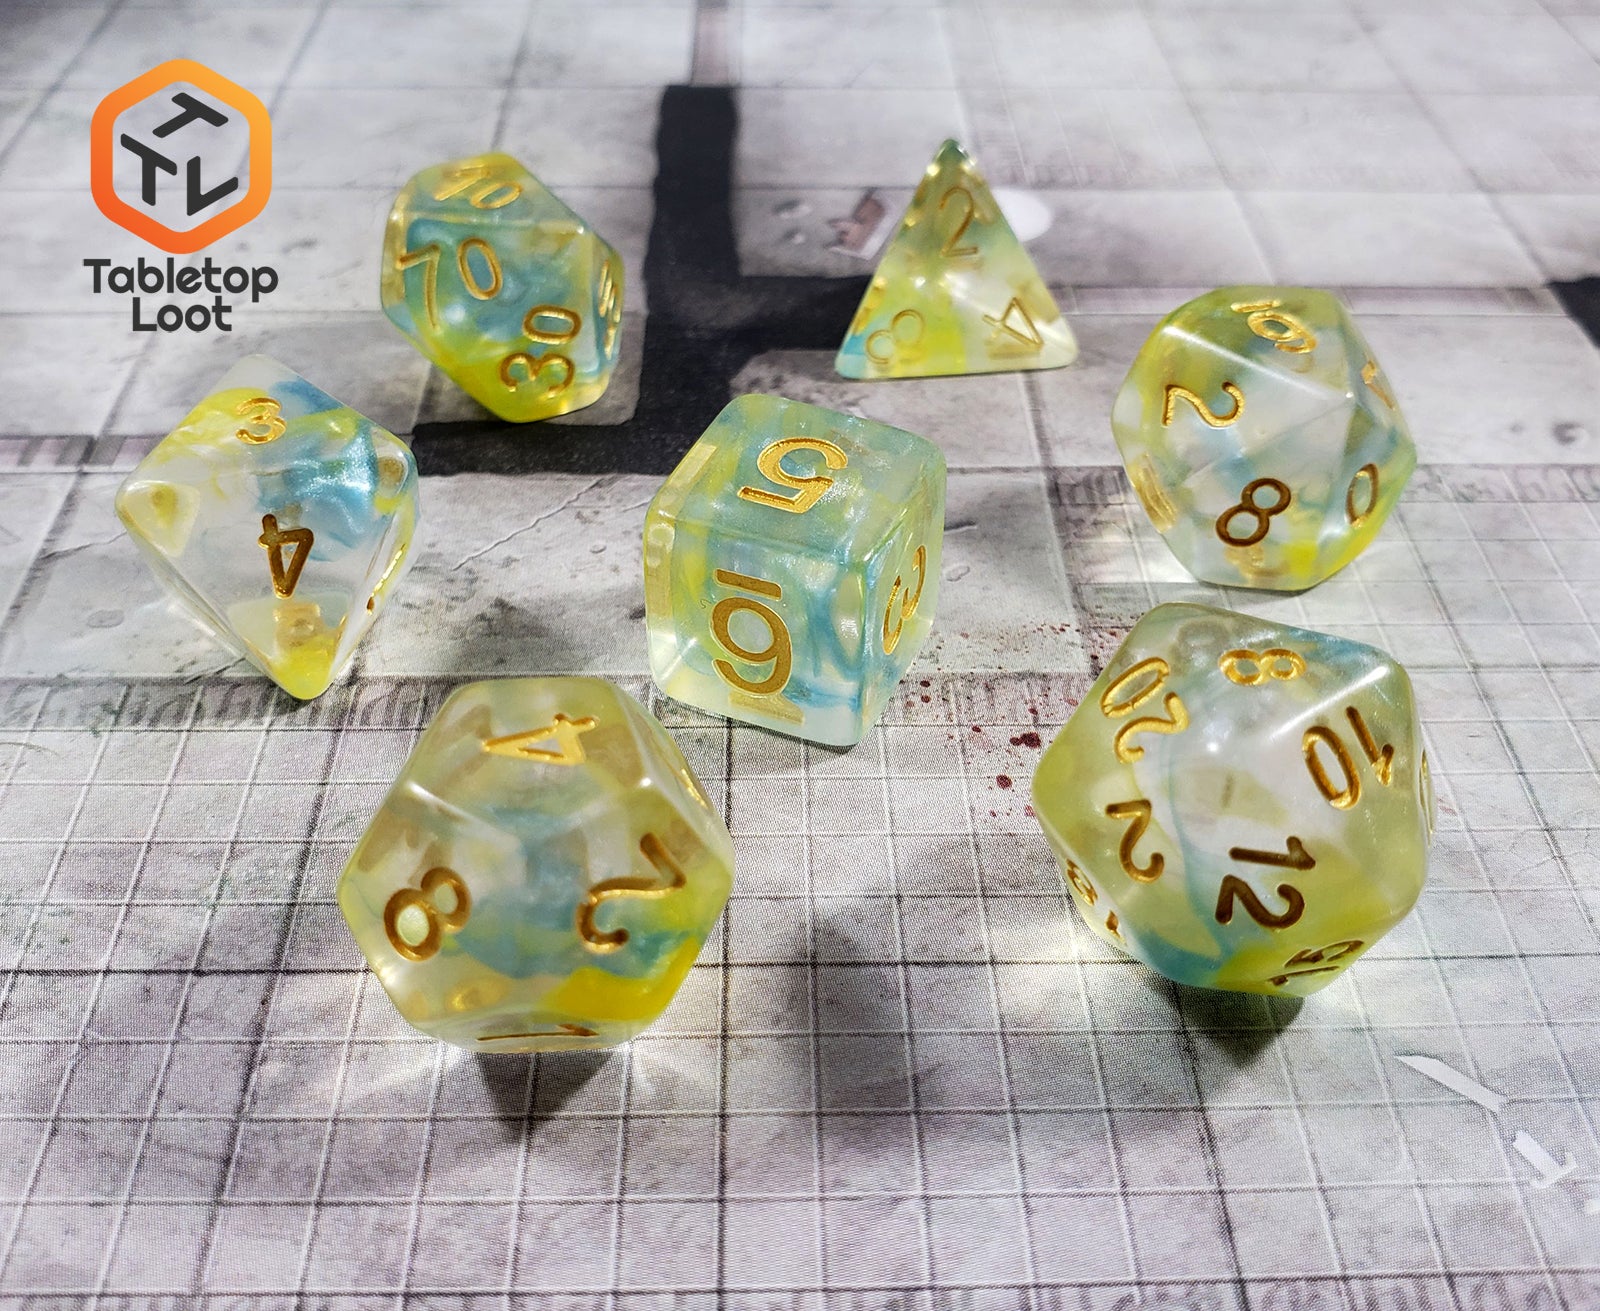 The Nature's Essence 7 piece dice set from Tabletop Loot with swirls of blue and green in clear resin with gold numbering.